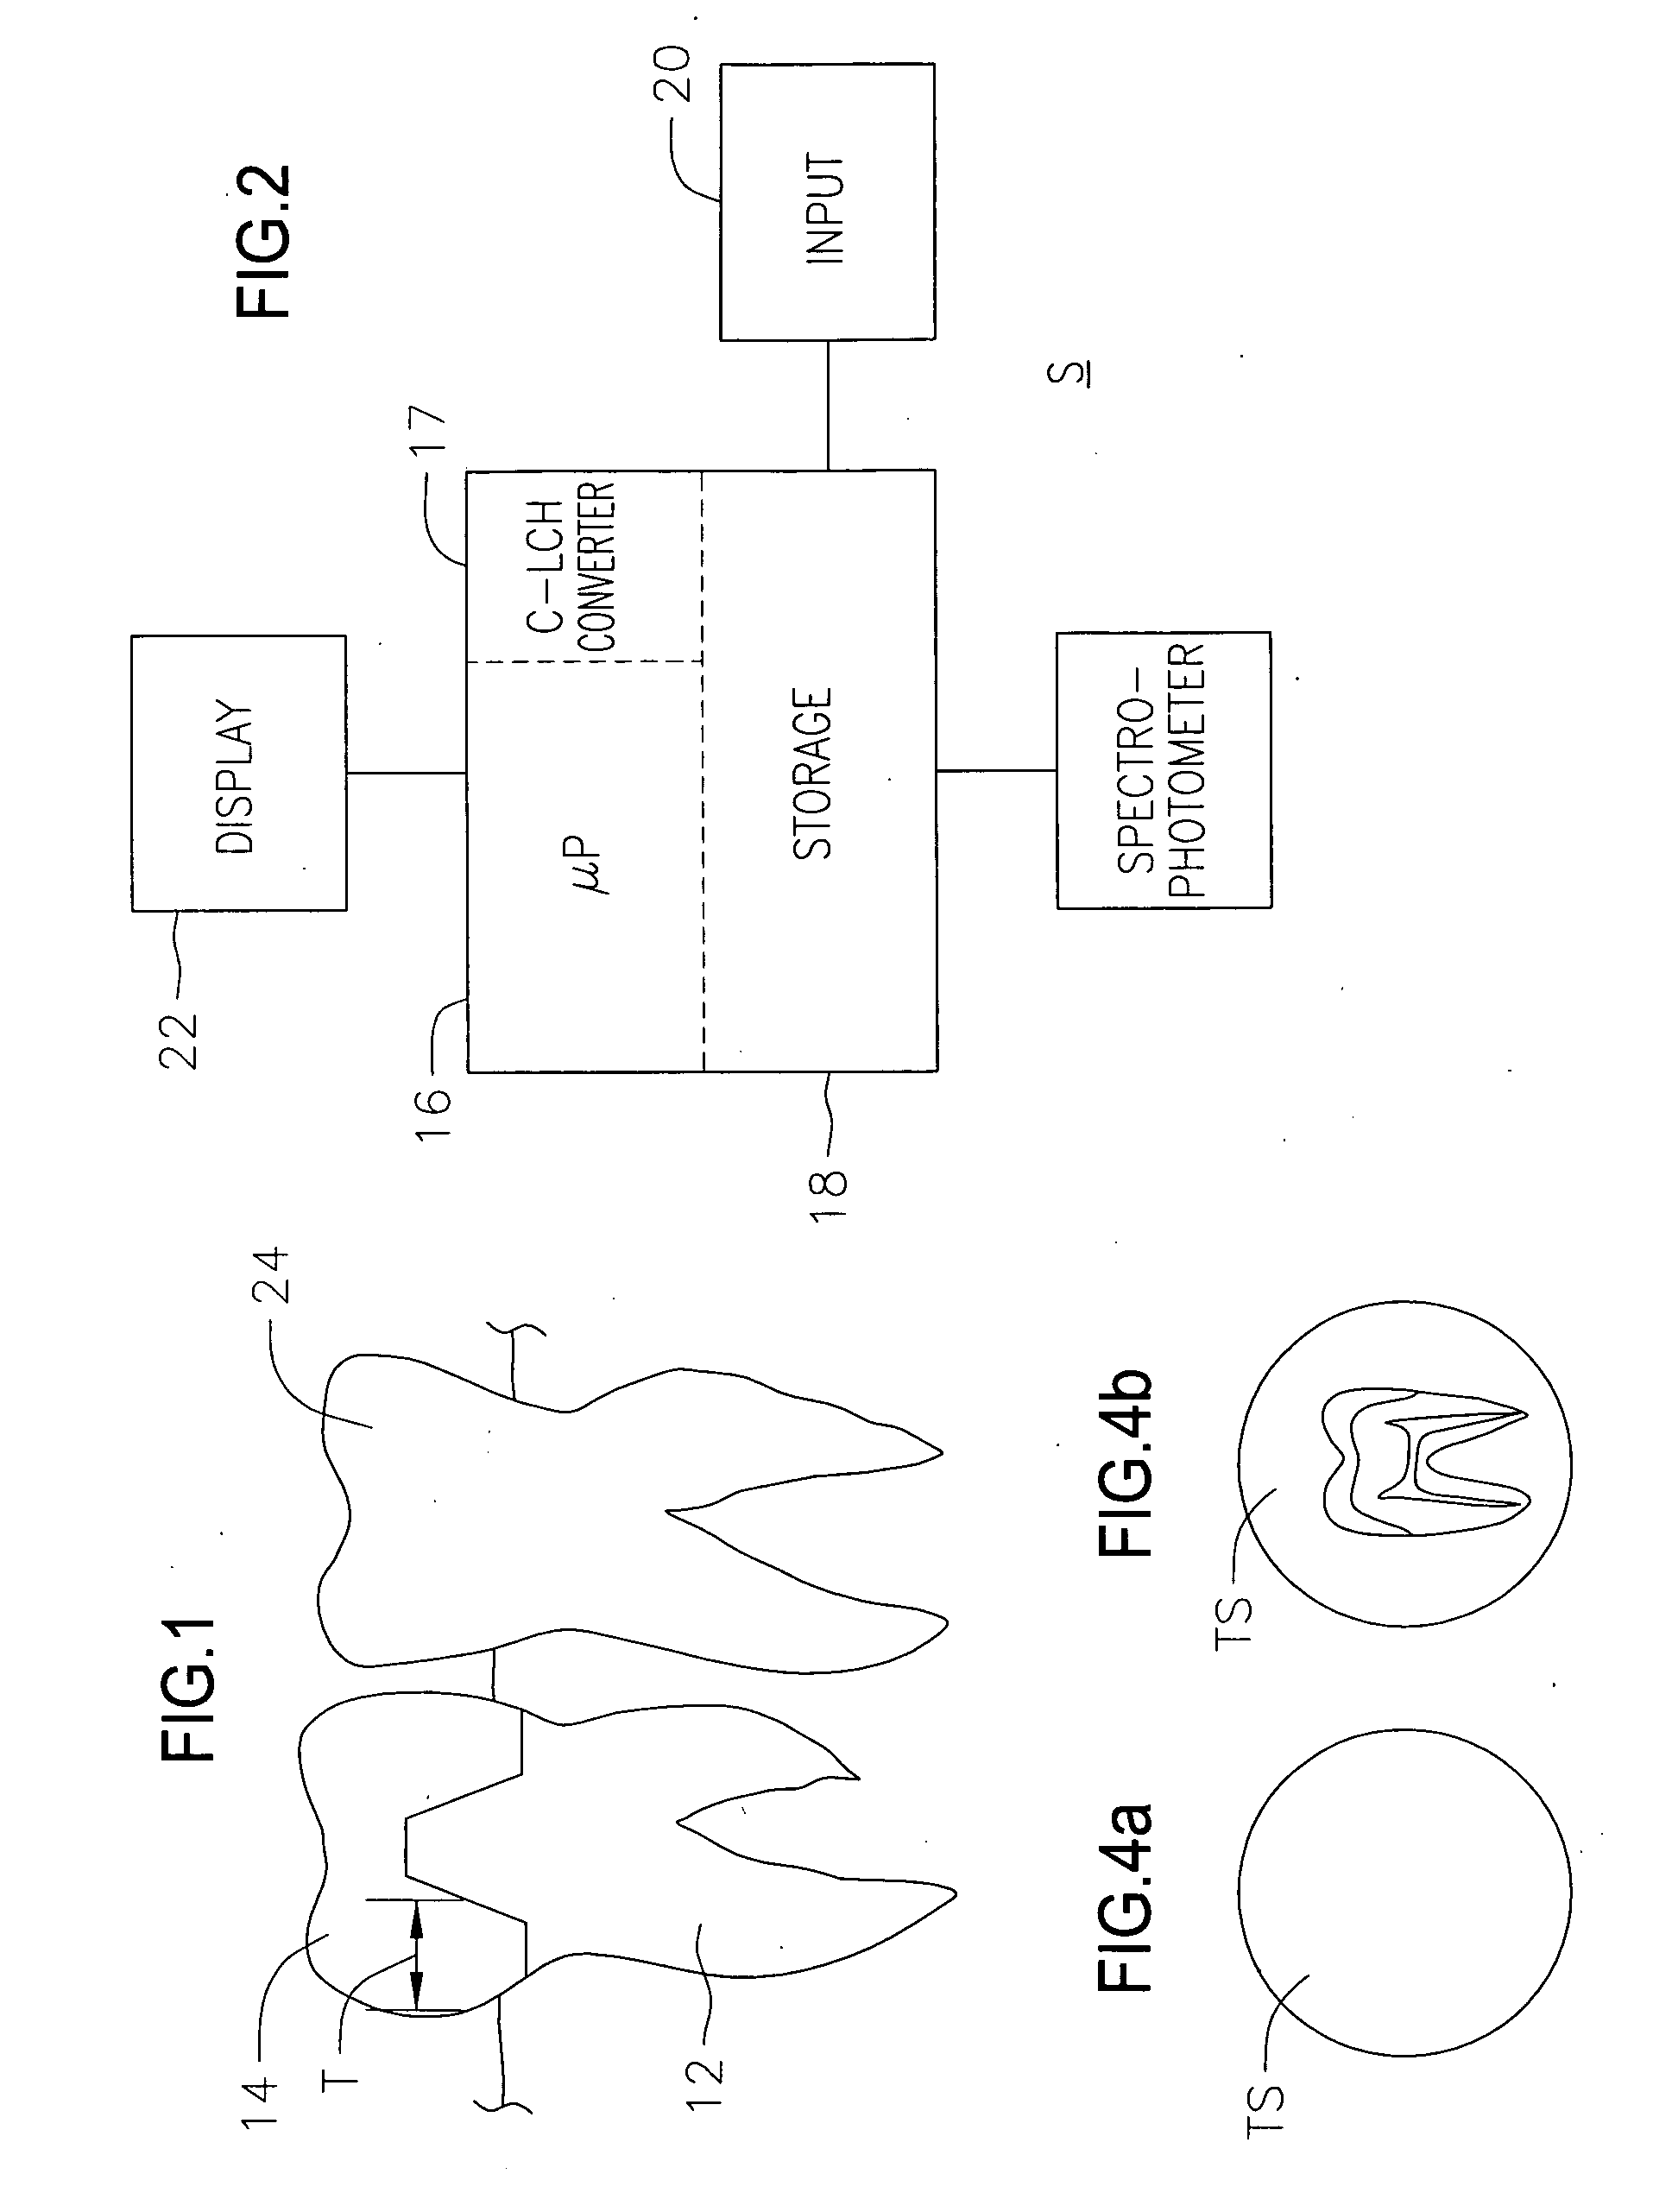 Method and apparatus for selecting translucent dental materials